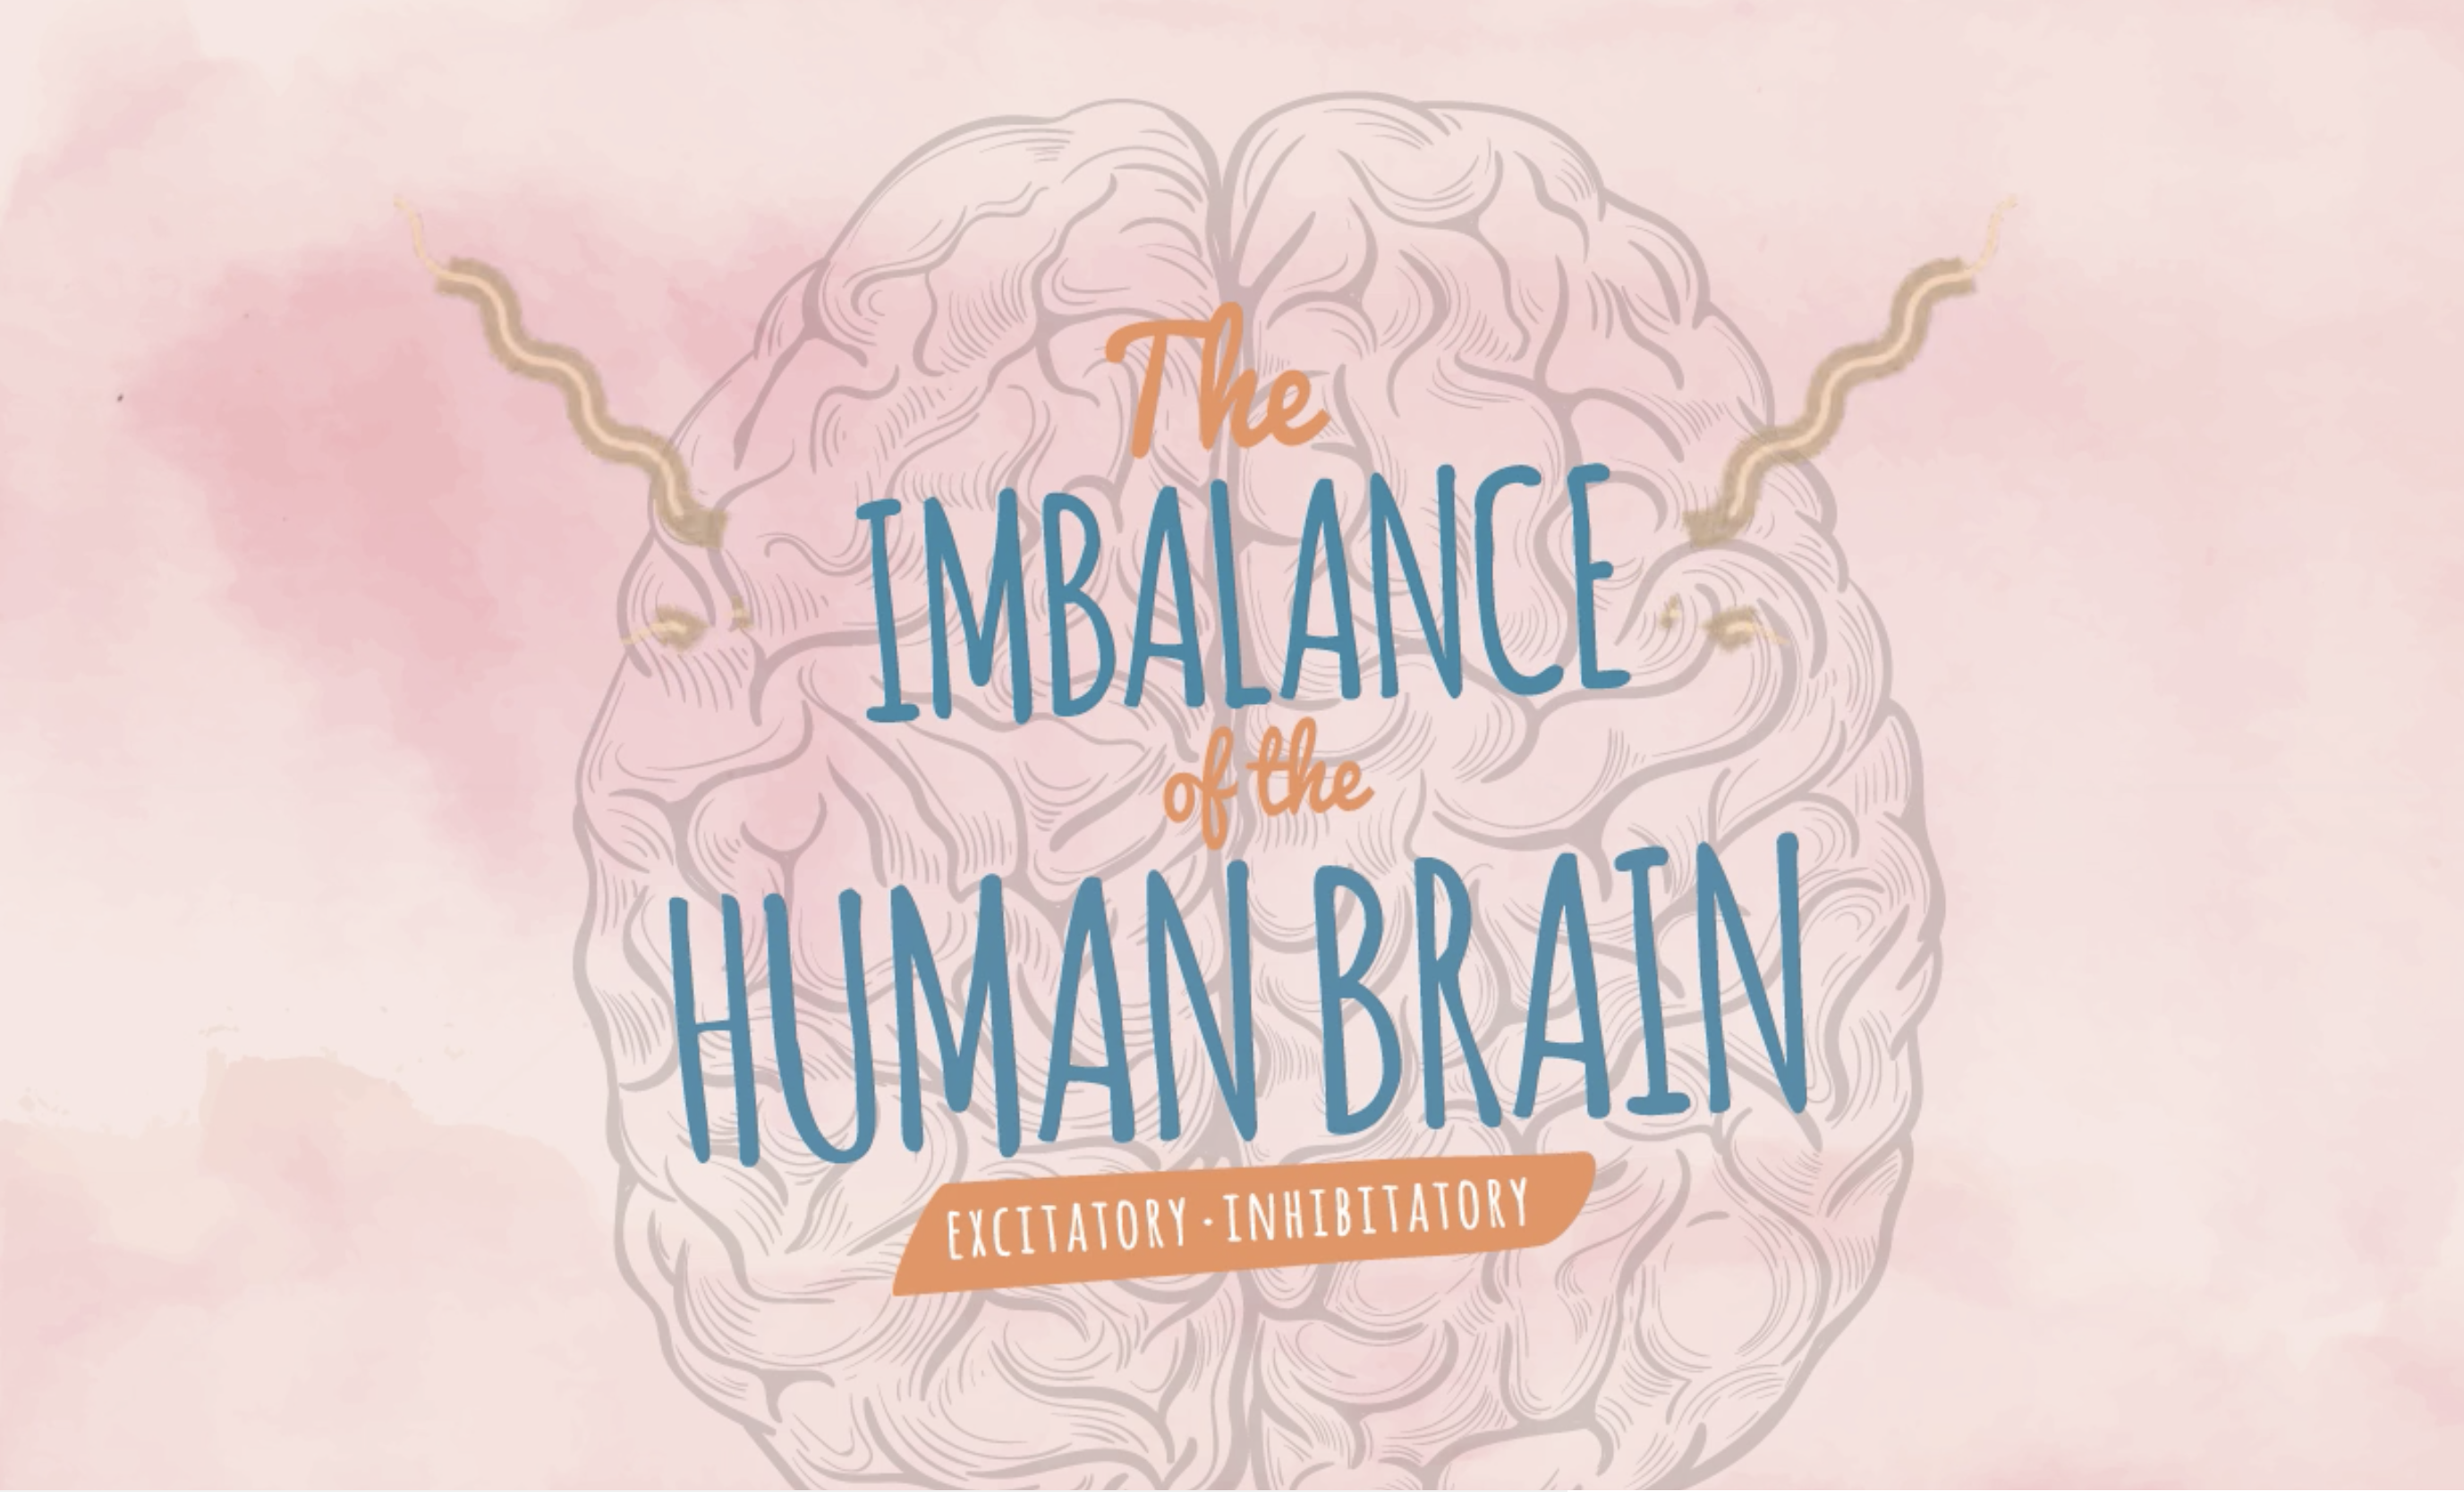 An Interactive Experience for users to understanding the imbalance situation in human brain.